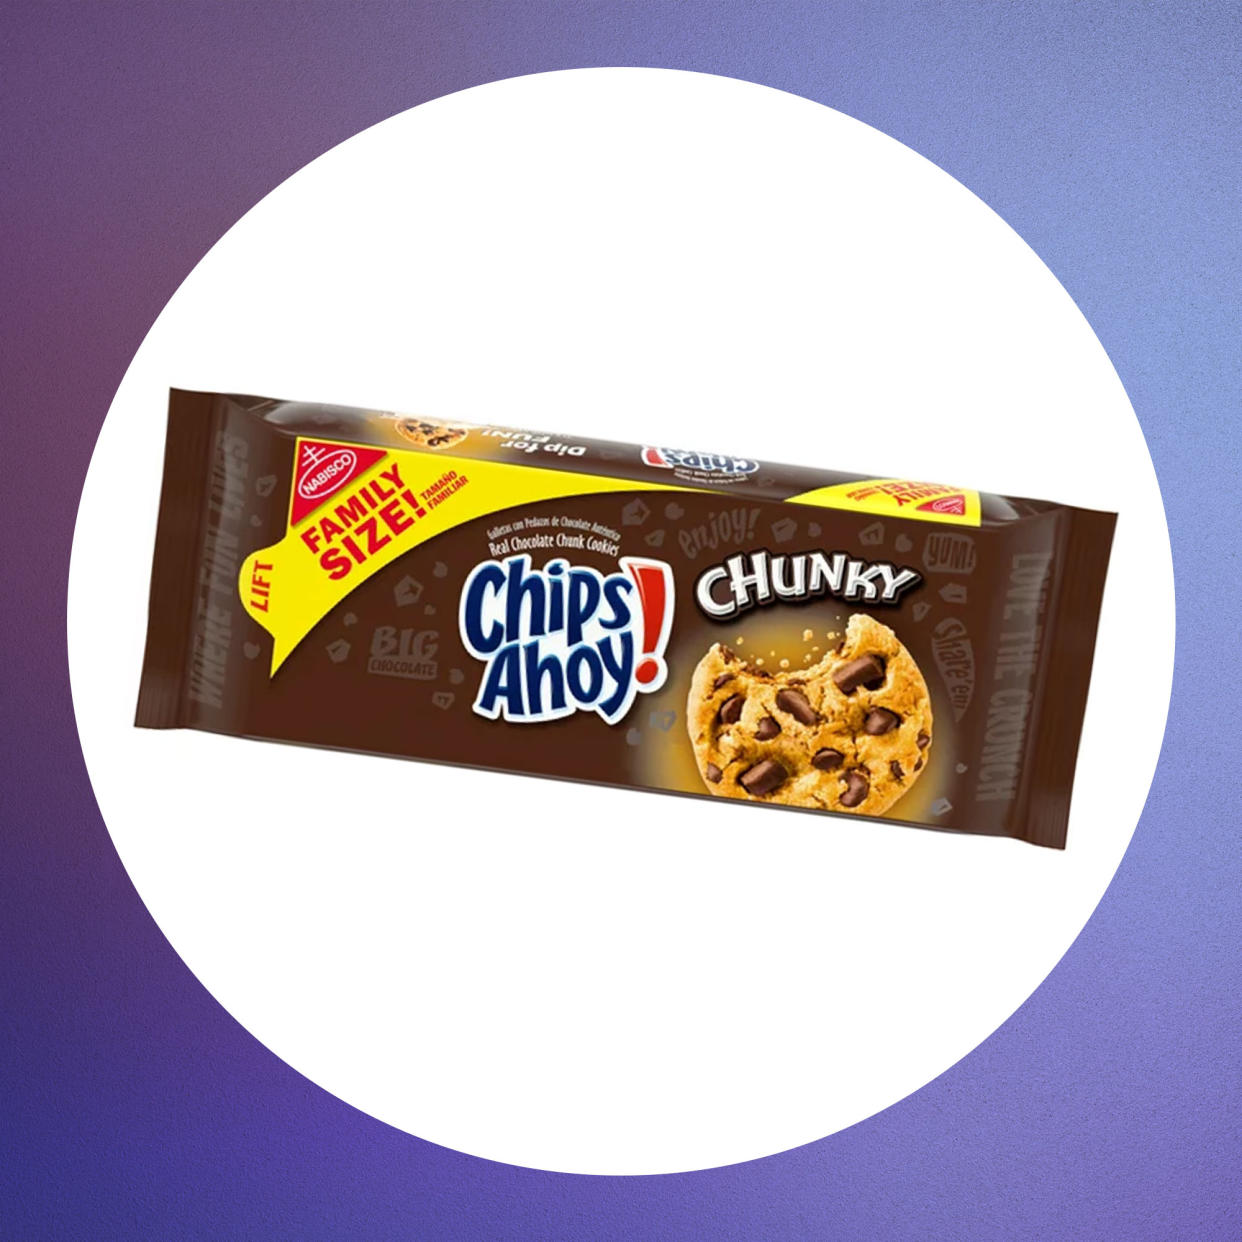 Chips Ahoy Chunky Chocolate Chip Cookies (Walmart)